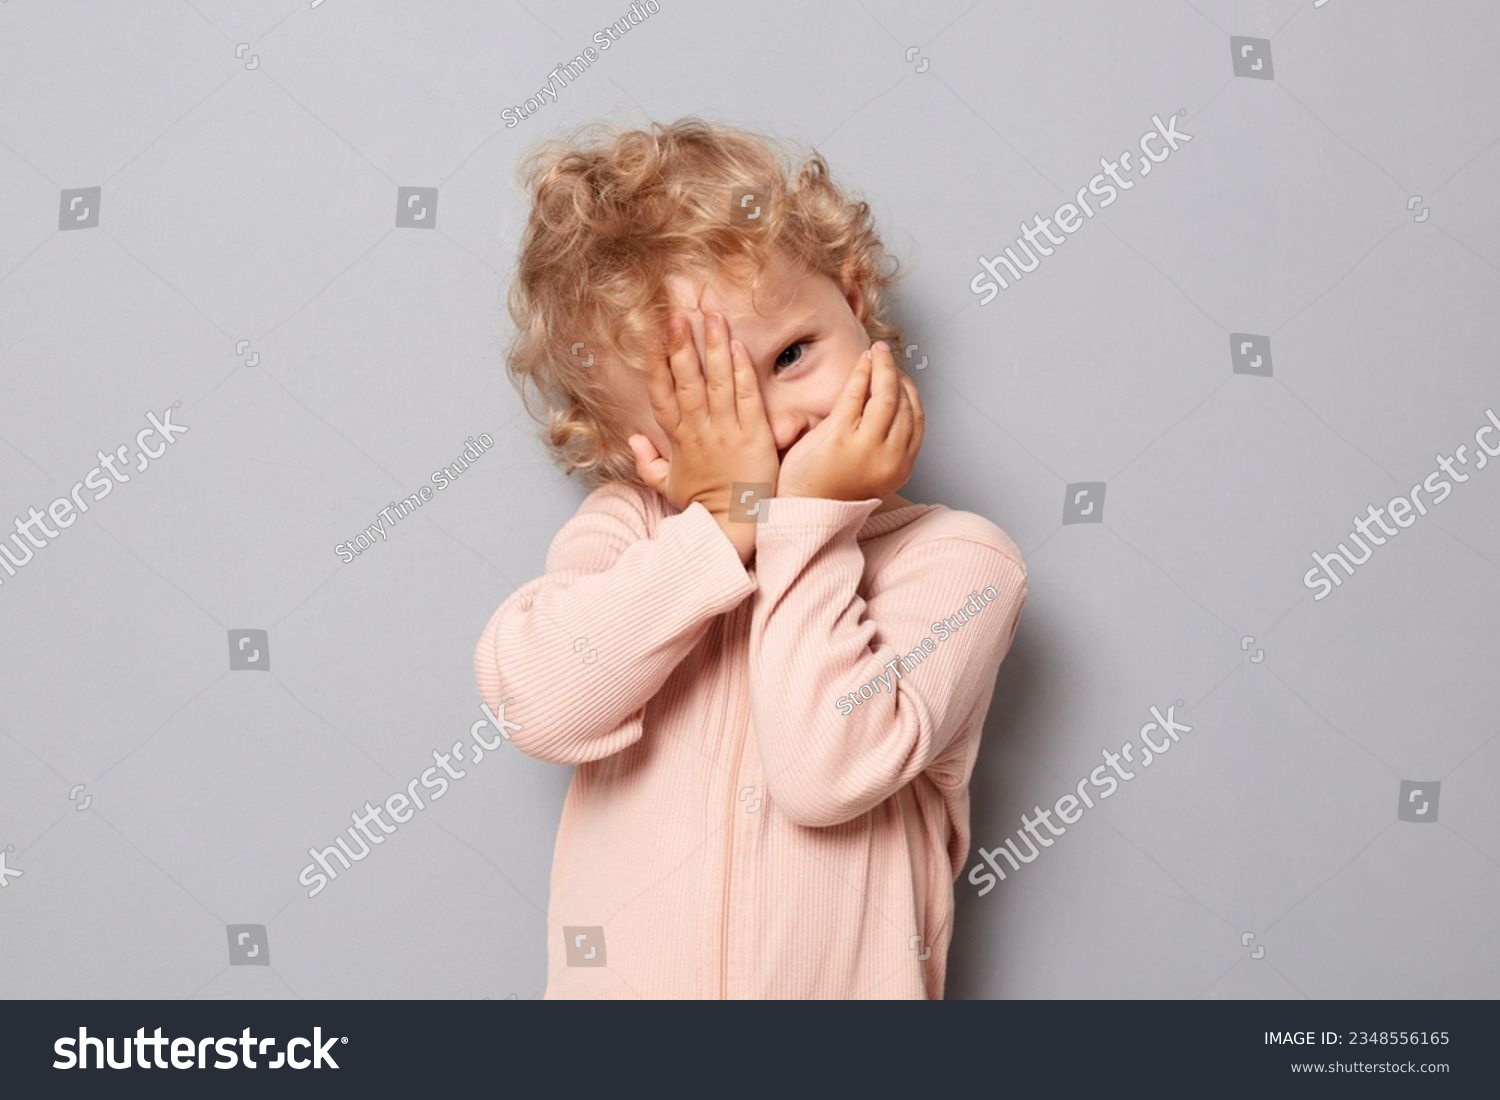 Adorable baby portrait. Shy baby girl with blonde wavy hair wearing rose shirt isolated over gray background hiding her face with arms looking through fingers to camera #2348556165